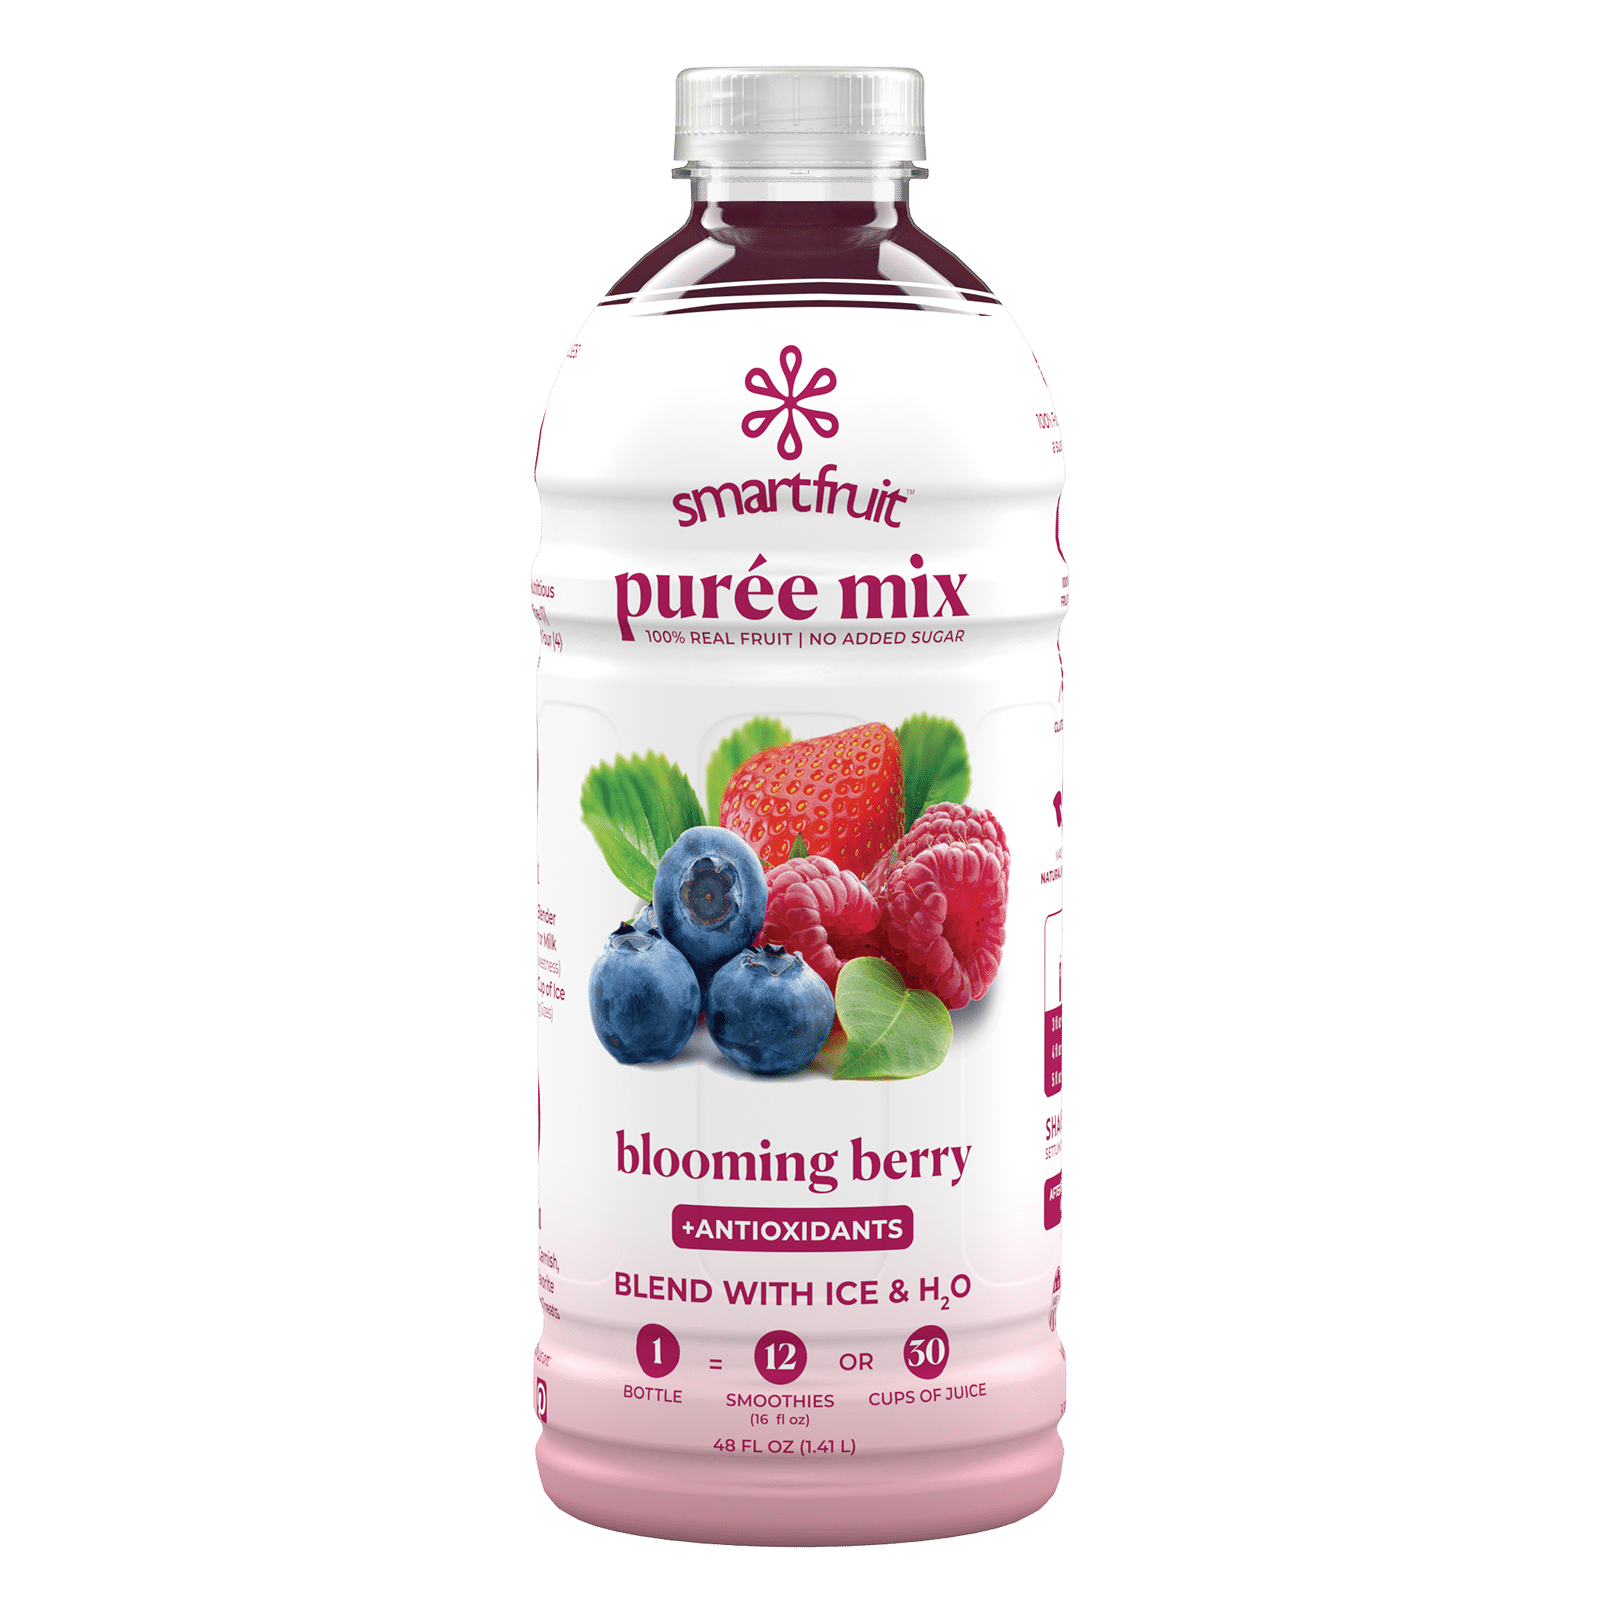 Smartfruit Blooming Berry Puree Mix bottle